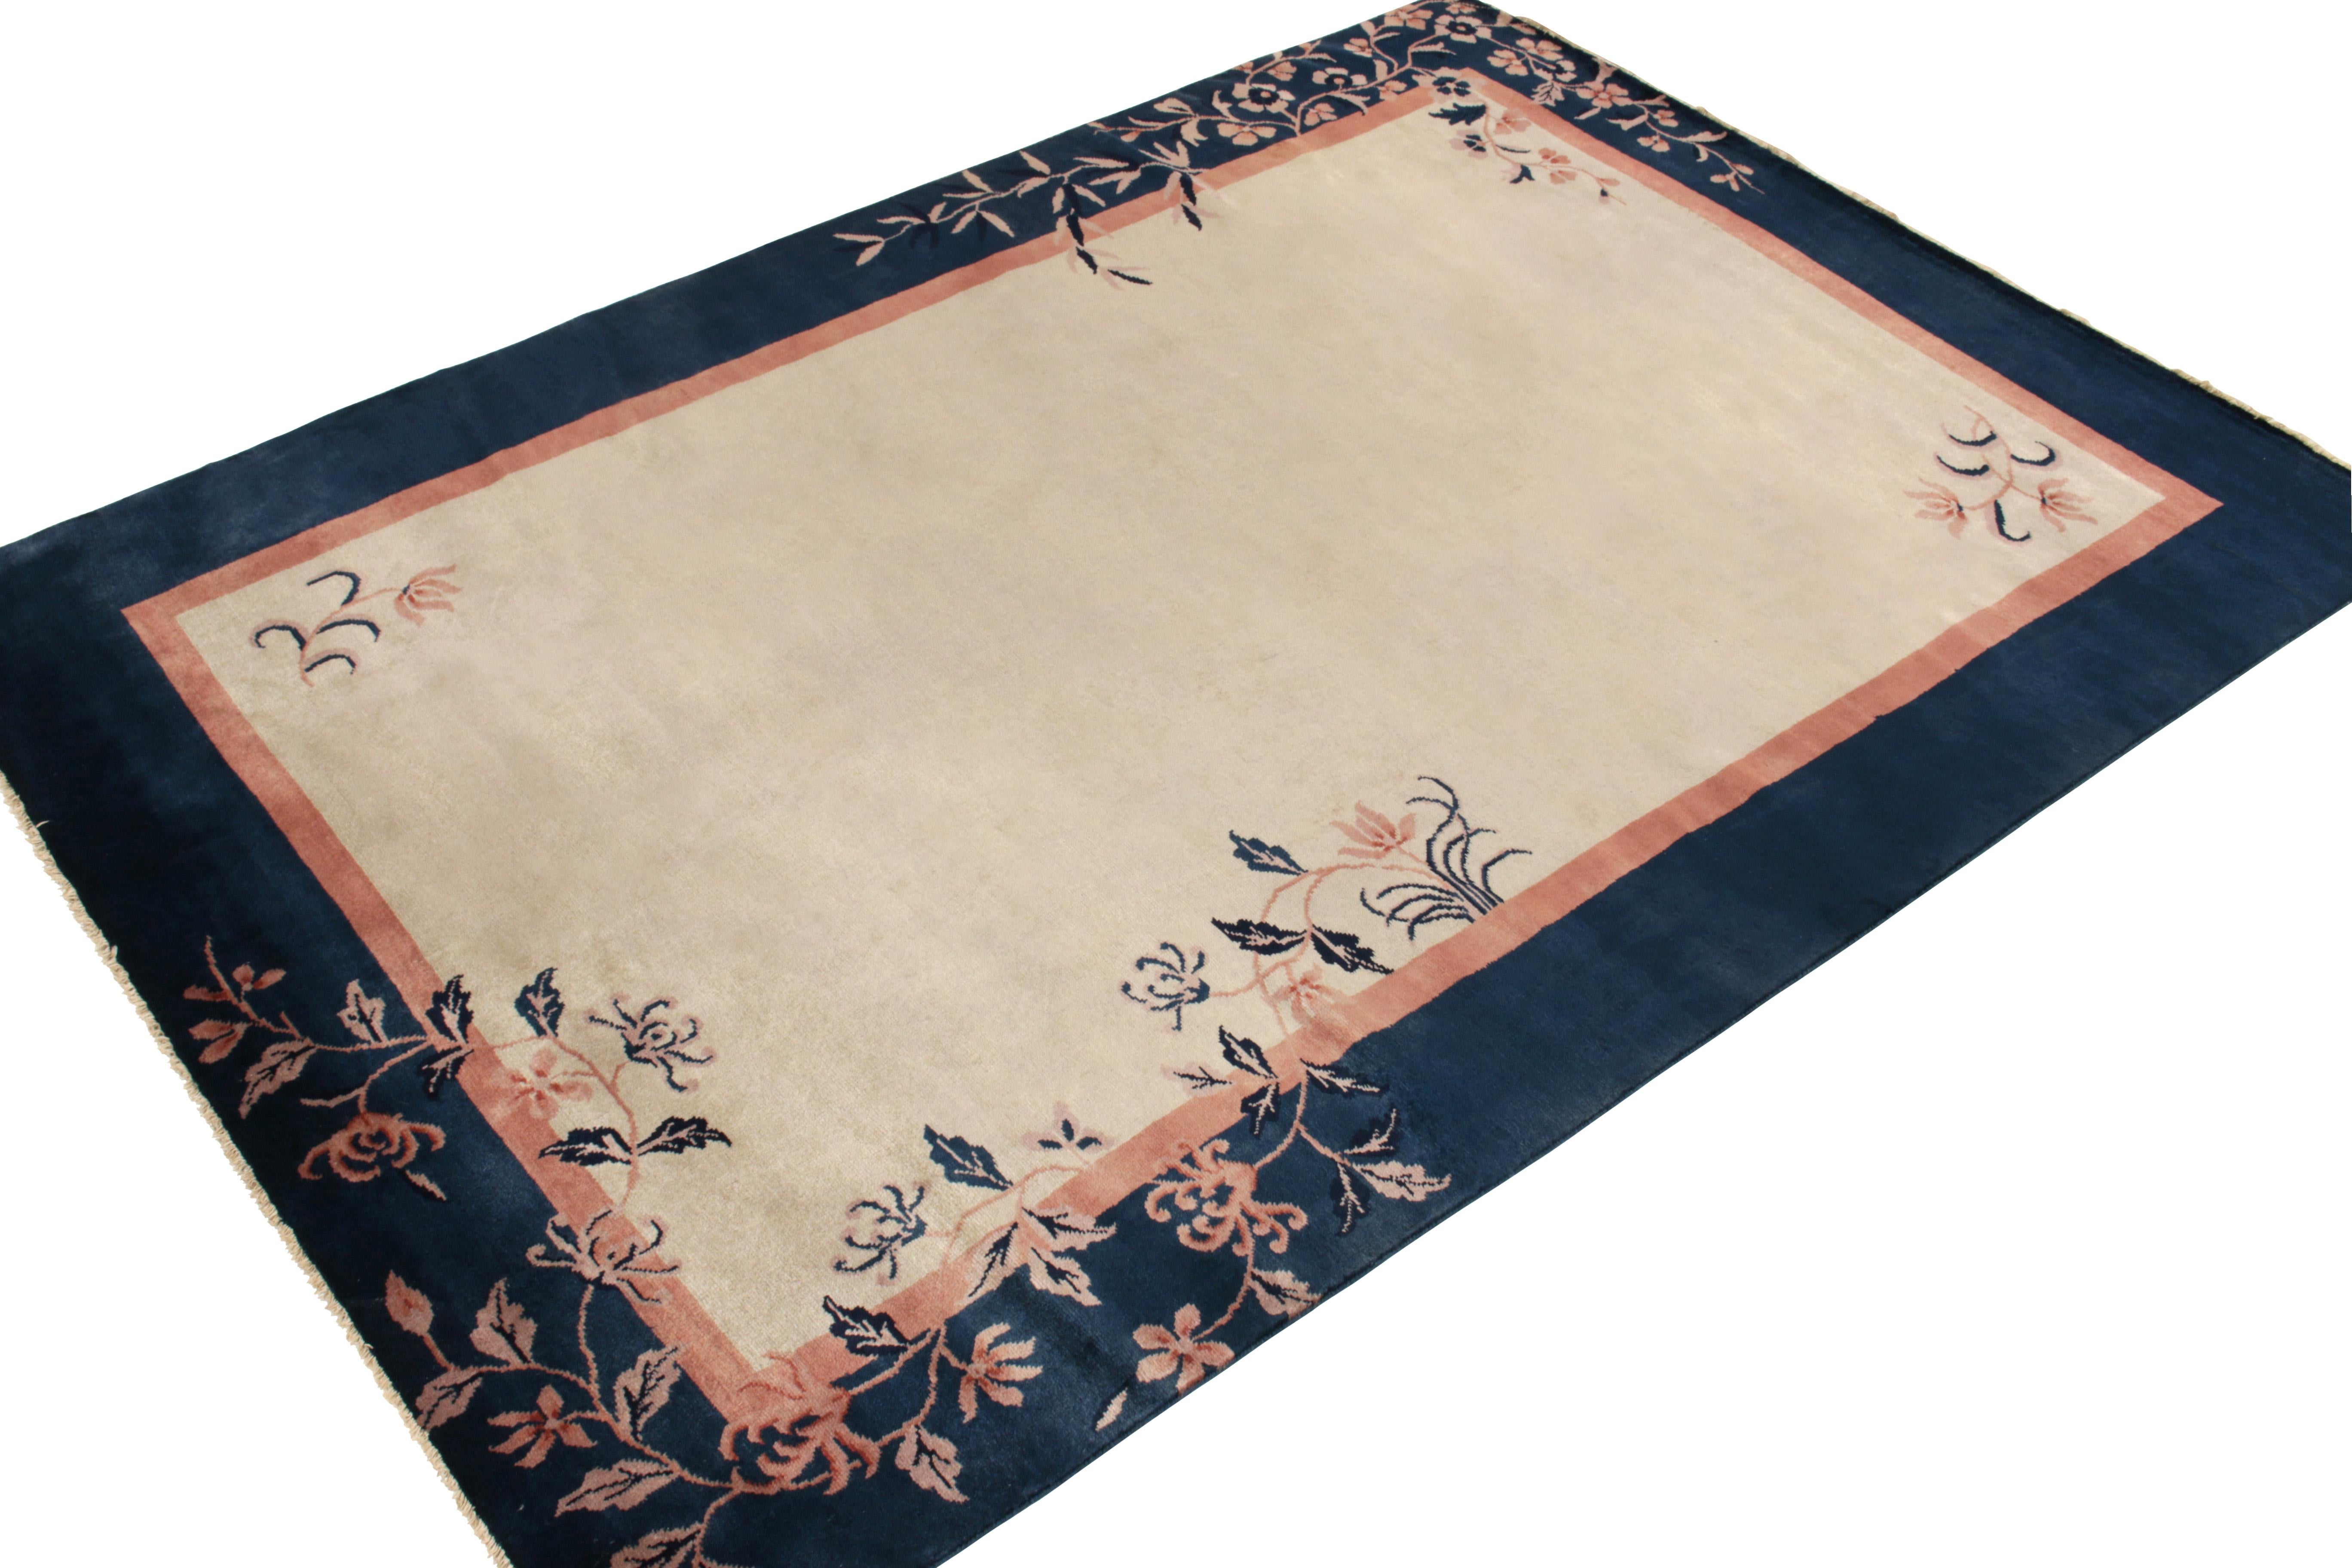 Art Deco Vintage Chinese Deco Style Rug in Beige Blue Peach Floral Pattern by Rug & Kilim For Sale